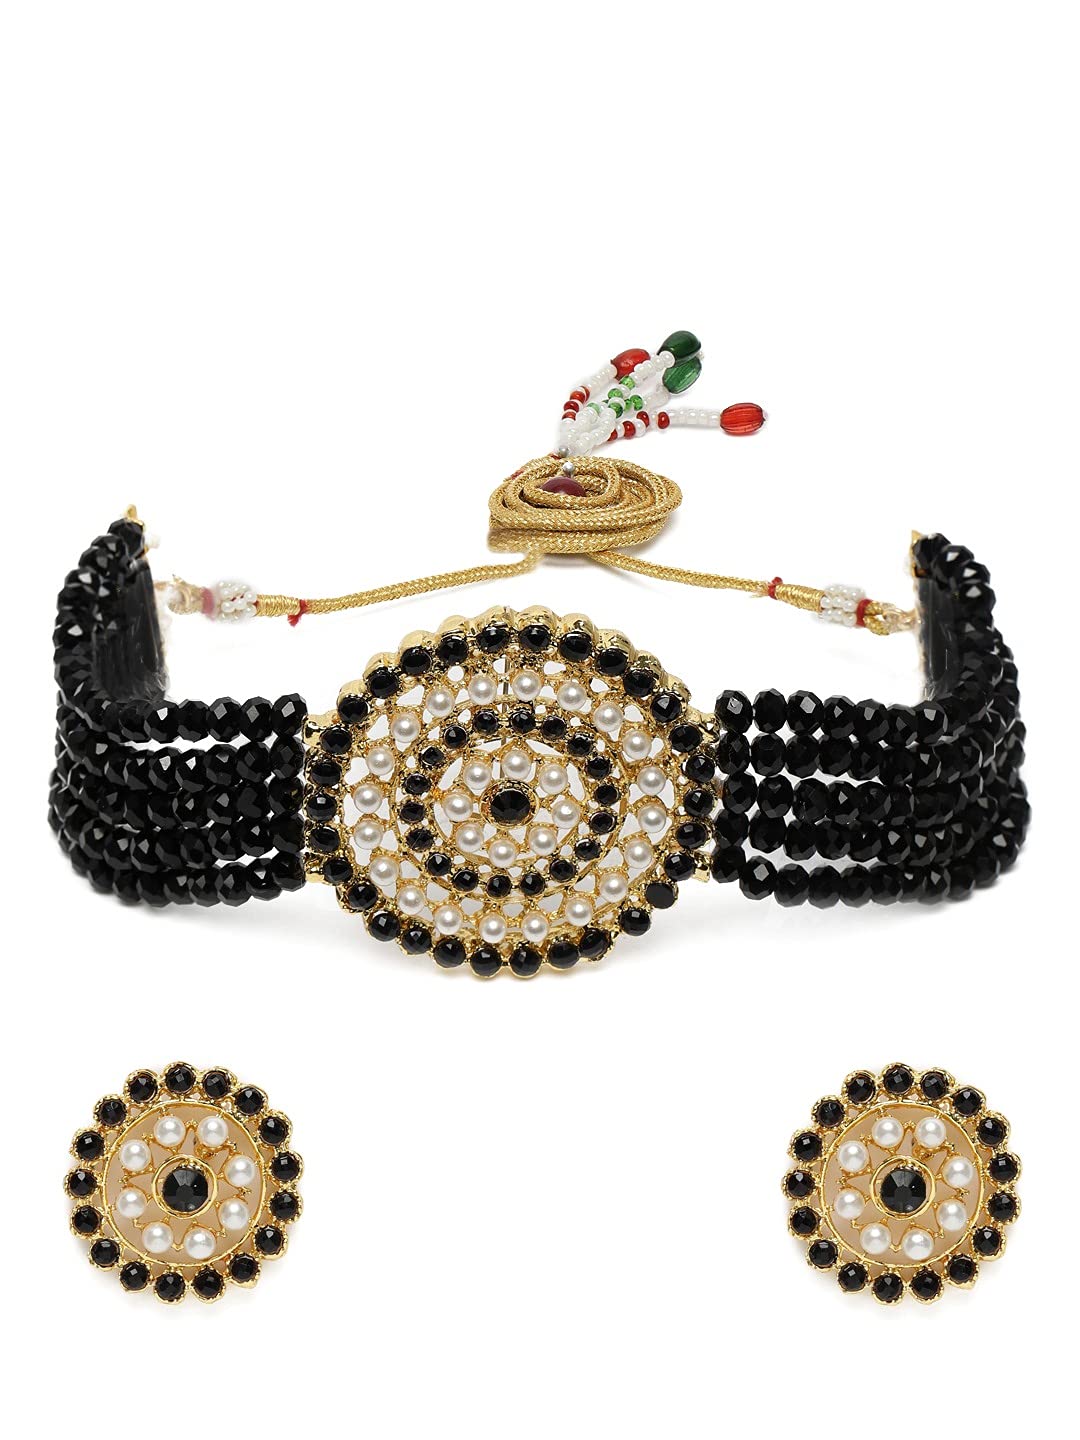 Women's Gold Plated Black & White Light Weight Crystal Stone Beaded Choker Necklace Jewellery Set - i jewels